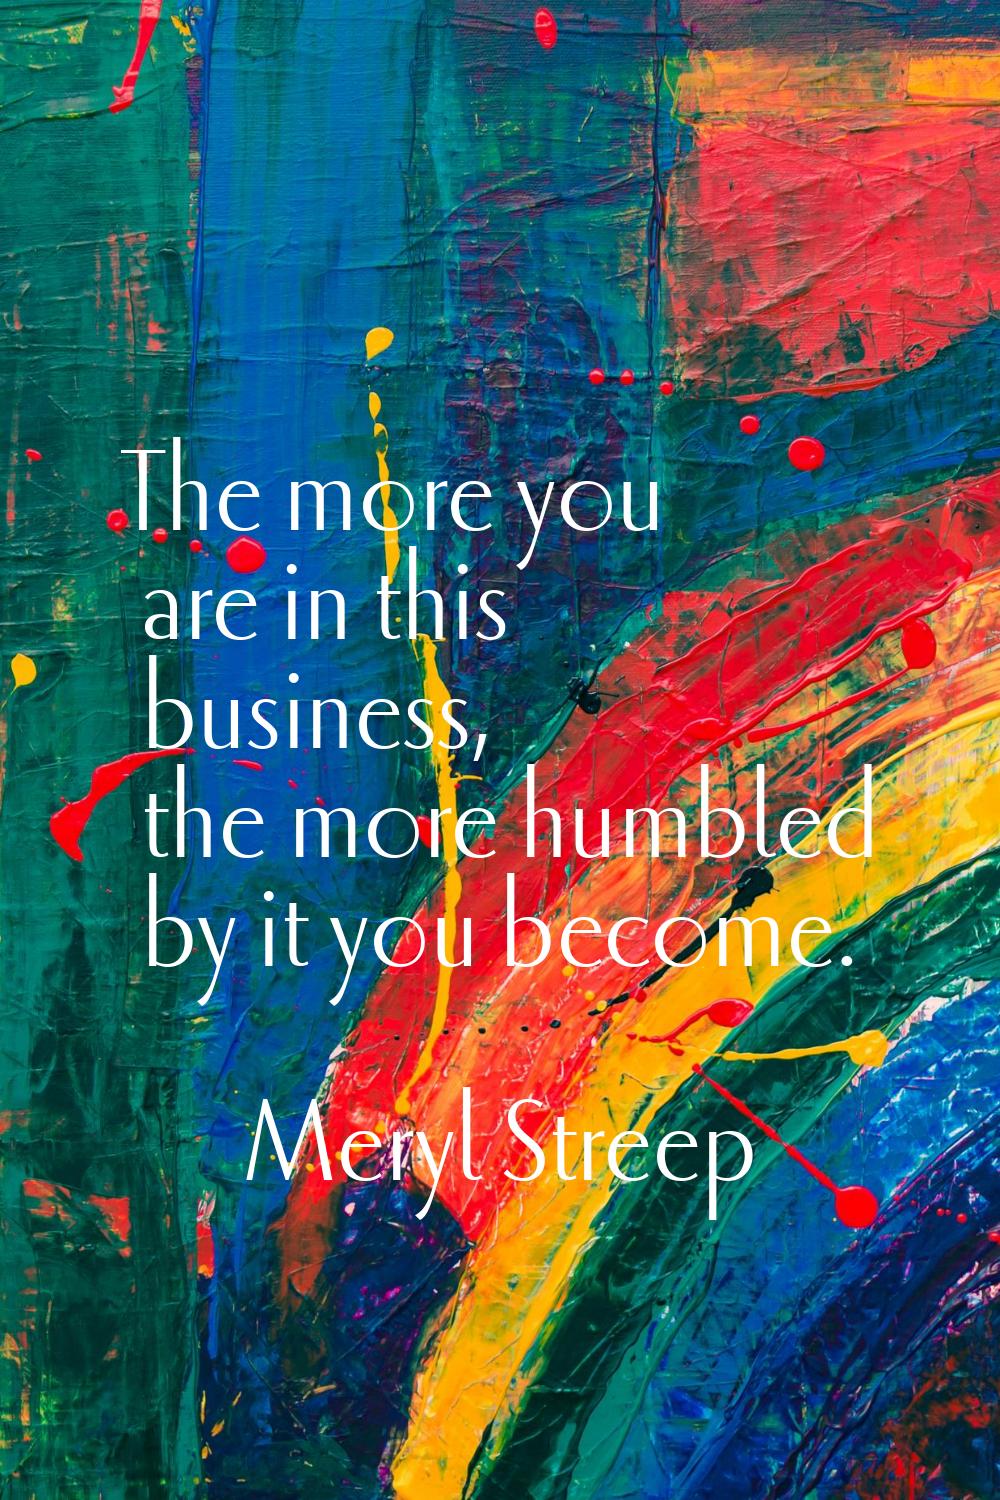 The more you are in this business, the more humbled by it you become.